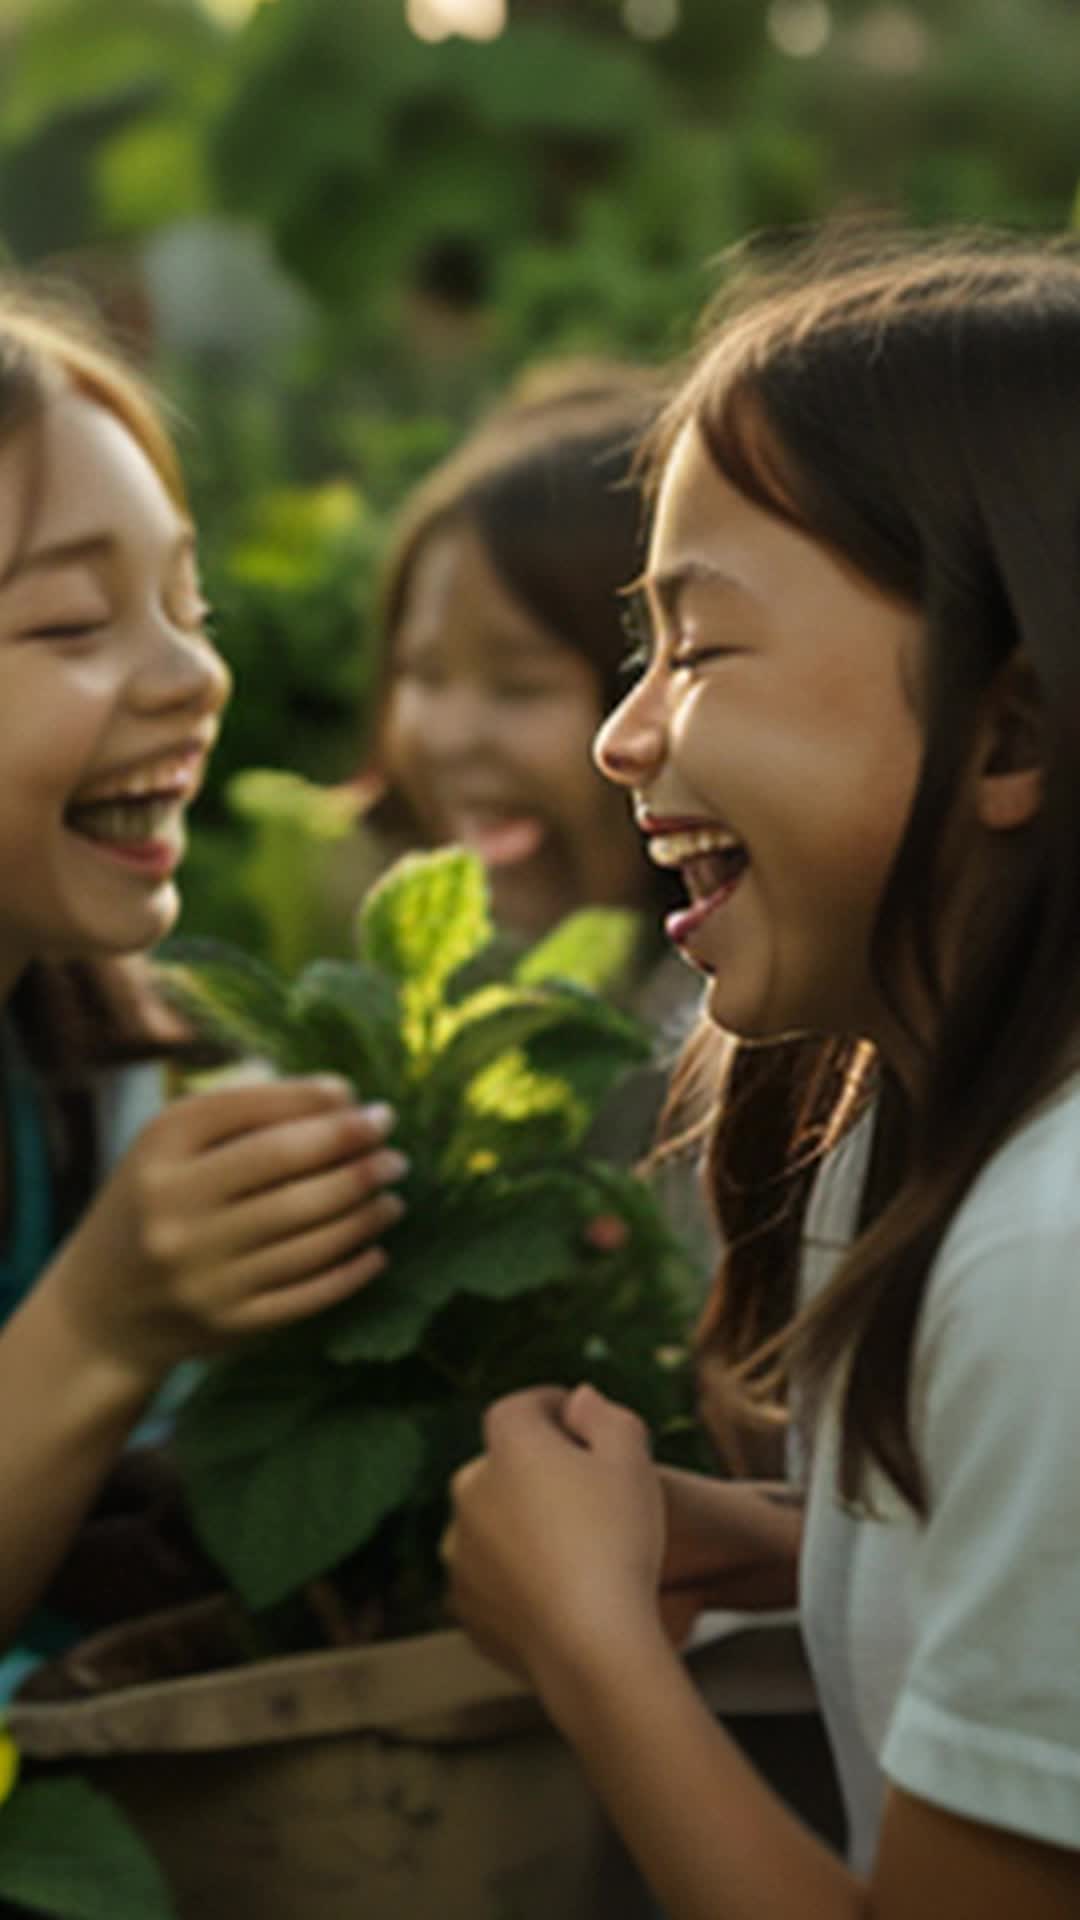 Cool breeze through community garden, eight-year-olds laughing, sharp scent of mint tickling noses, playful shouts, vibrant greenery surrounding, soft sunlight casting glowing light, detailed and sharp focus on expressions of joy